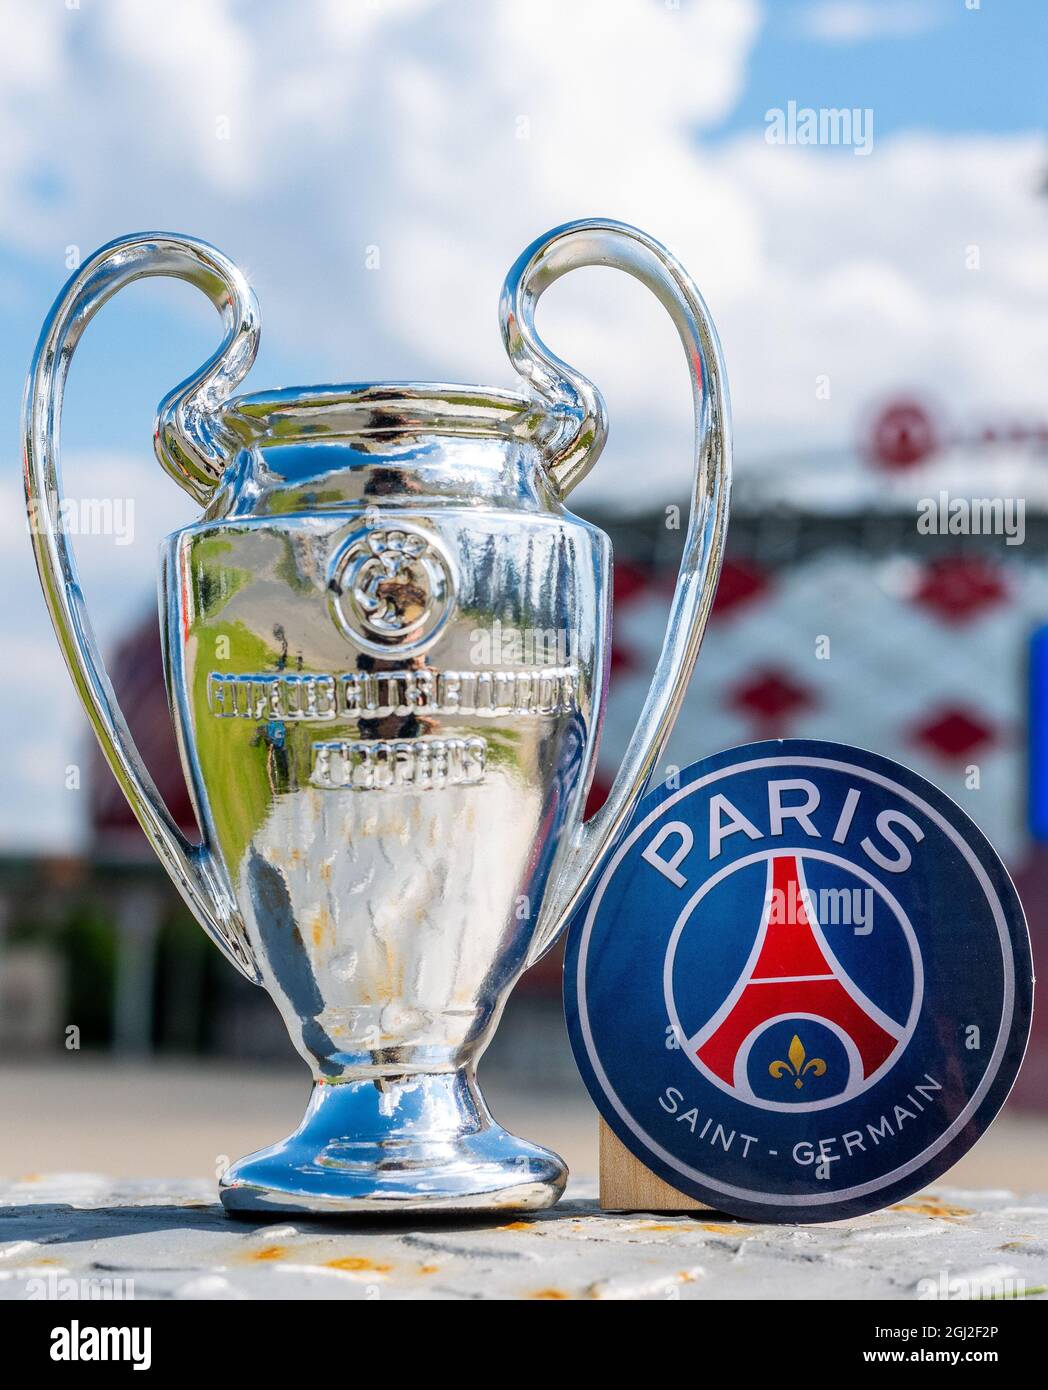 June 14, 2021 Paris, France. The emblem of the football club Paris  Saint-Germain F.C. and the UEFA Champions League Cup against the backdrop  of a mode Stock Photo - Alamy